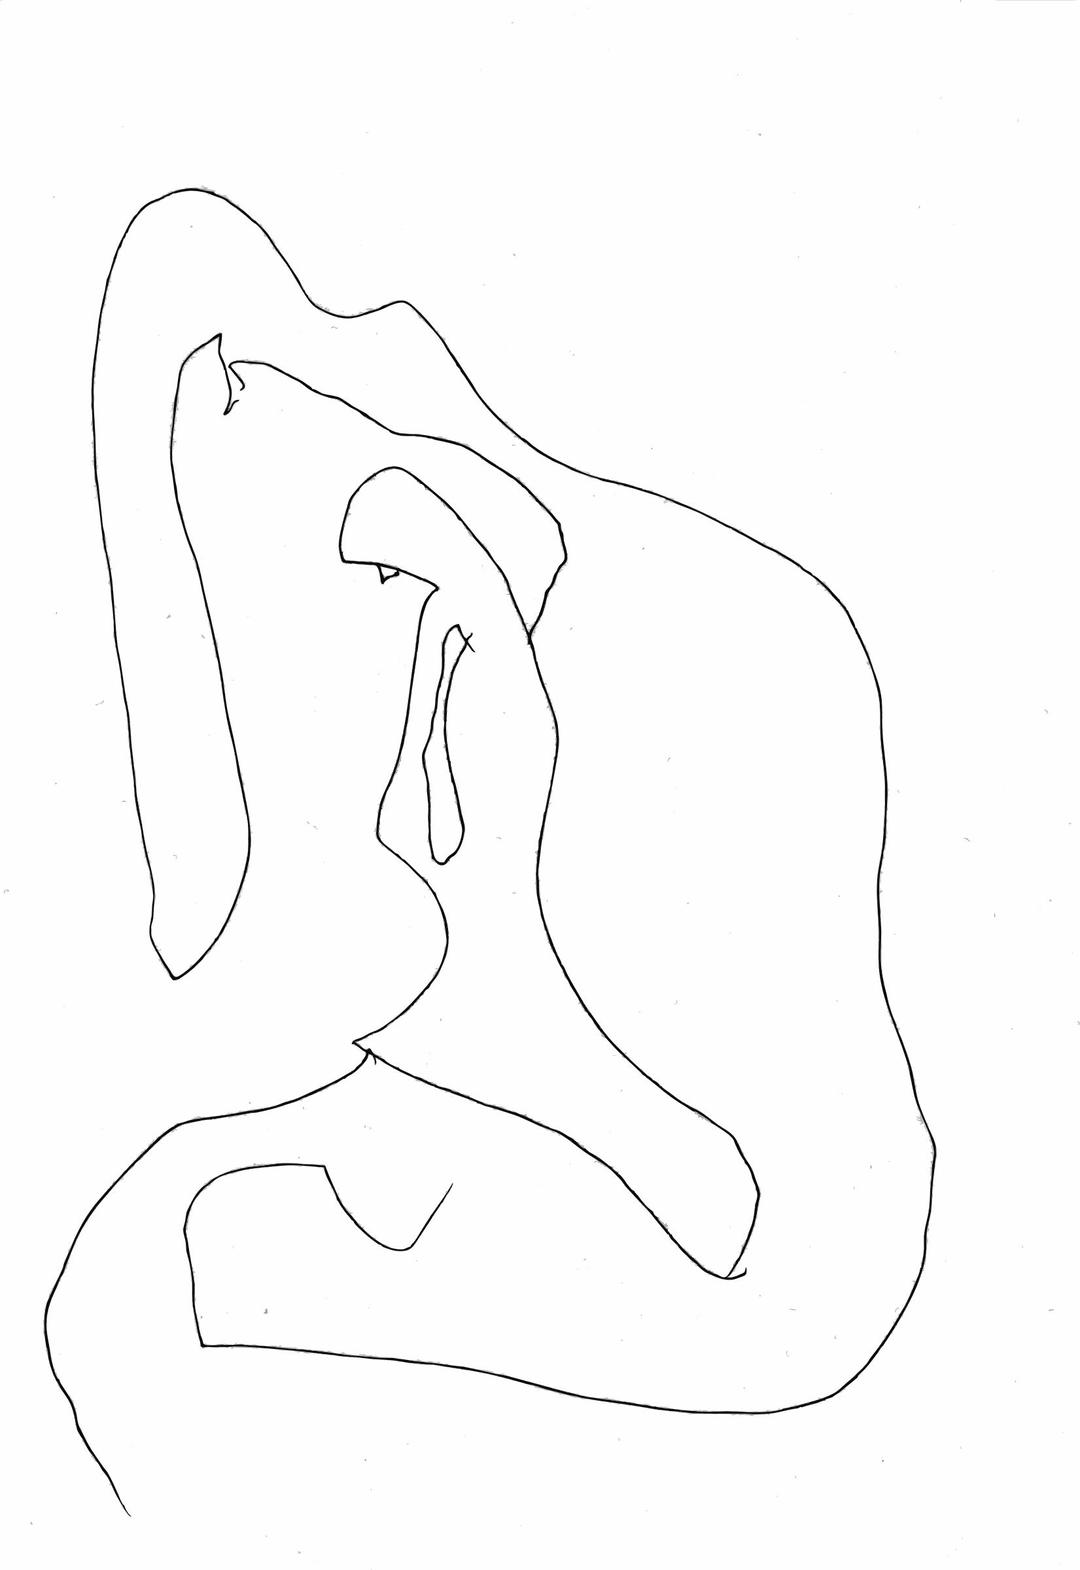 Mary outside the cave pen drawing png transparent